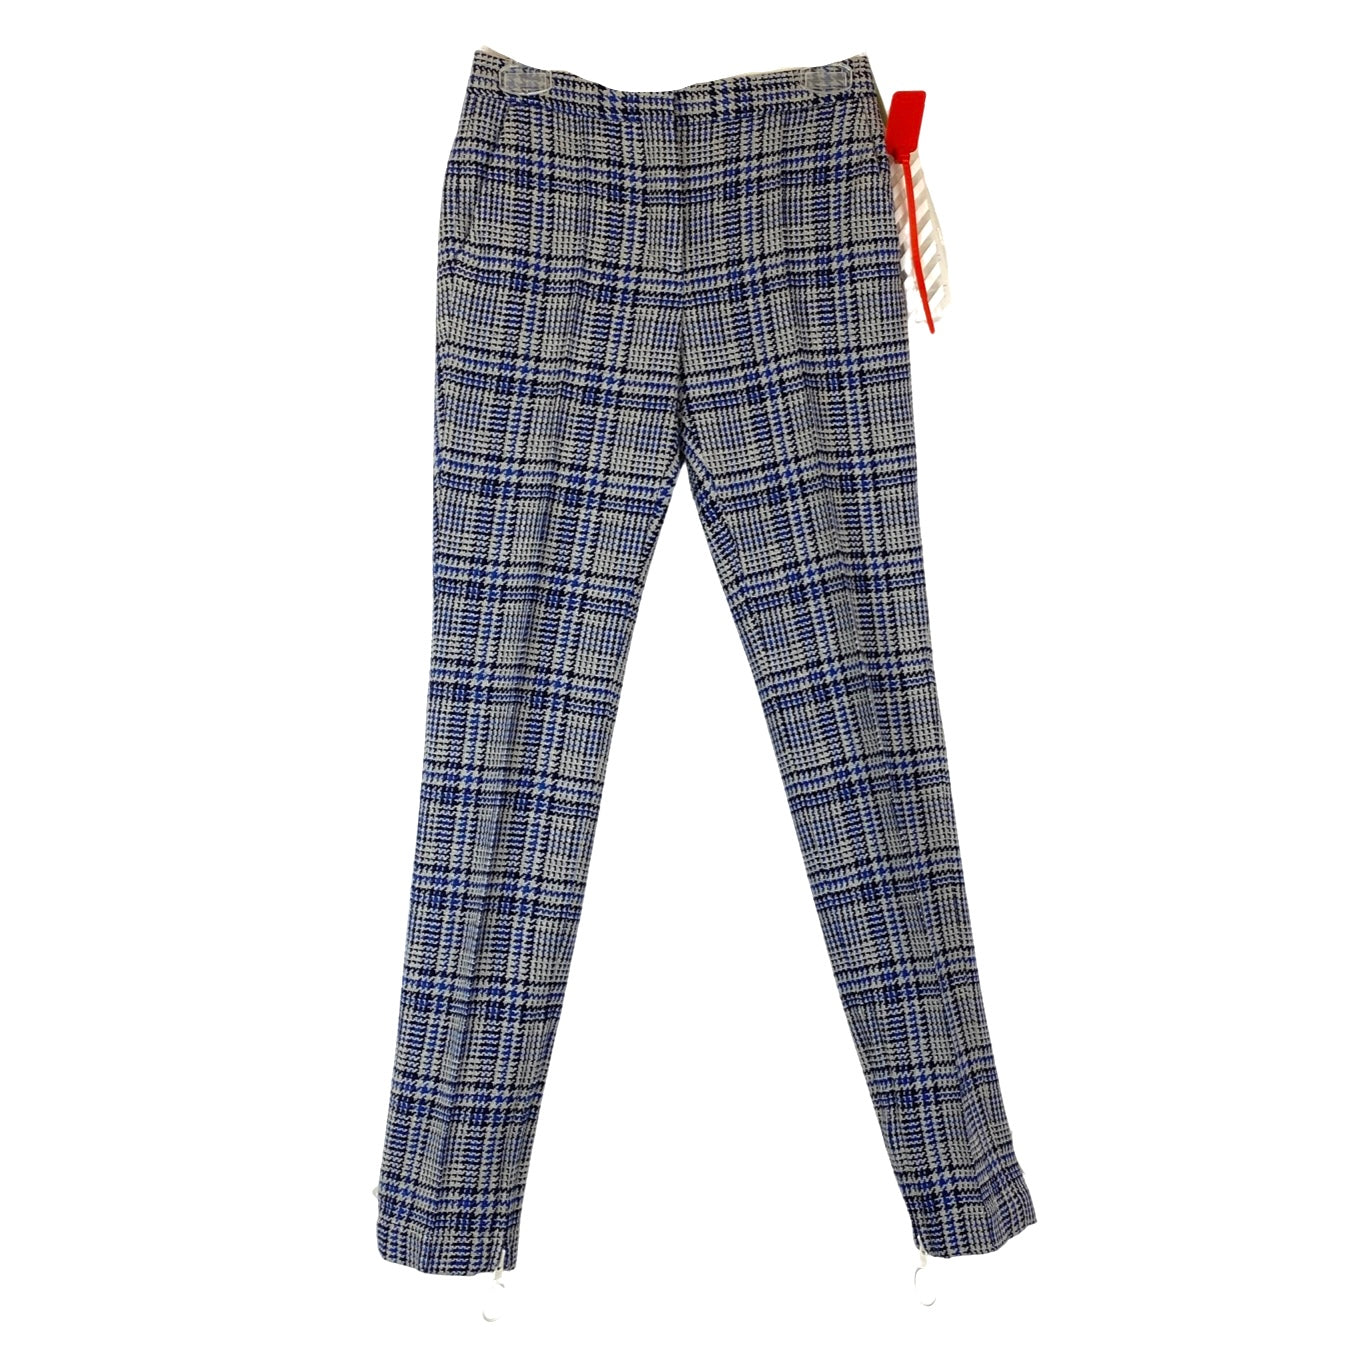 Off-White c/o Virgil Abloh Main Label Houndstooth Truck Pant